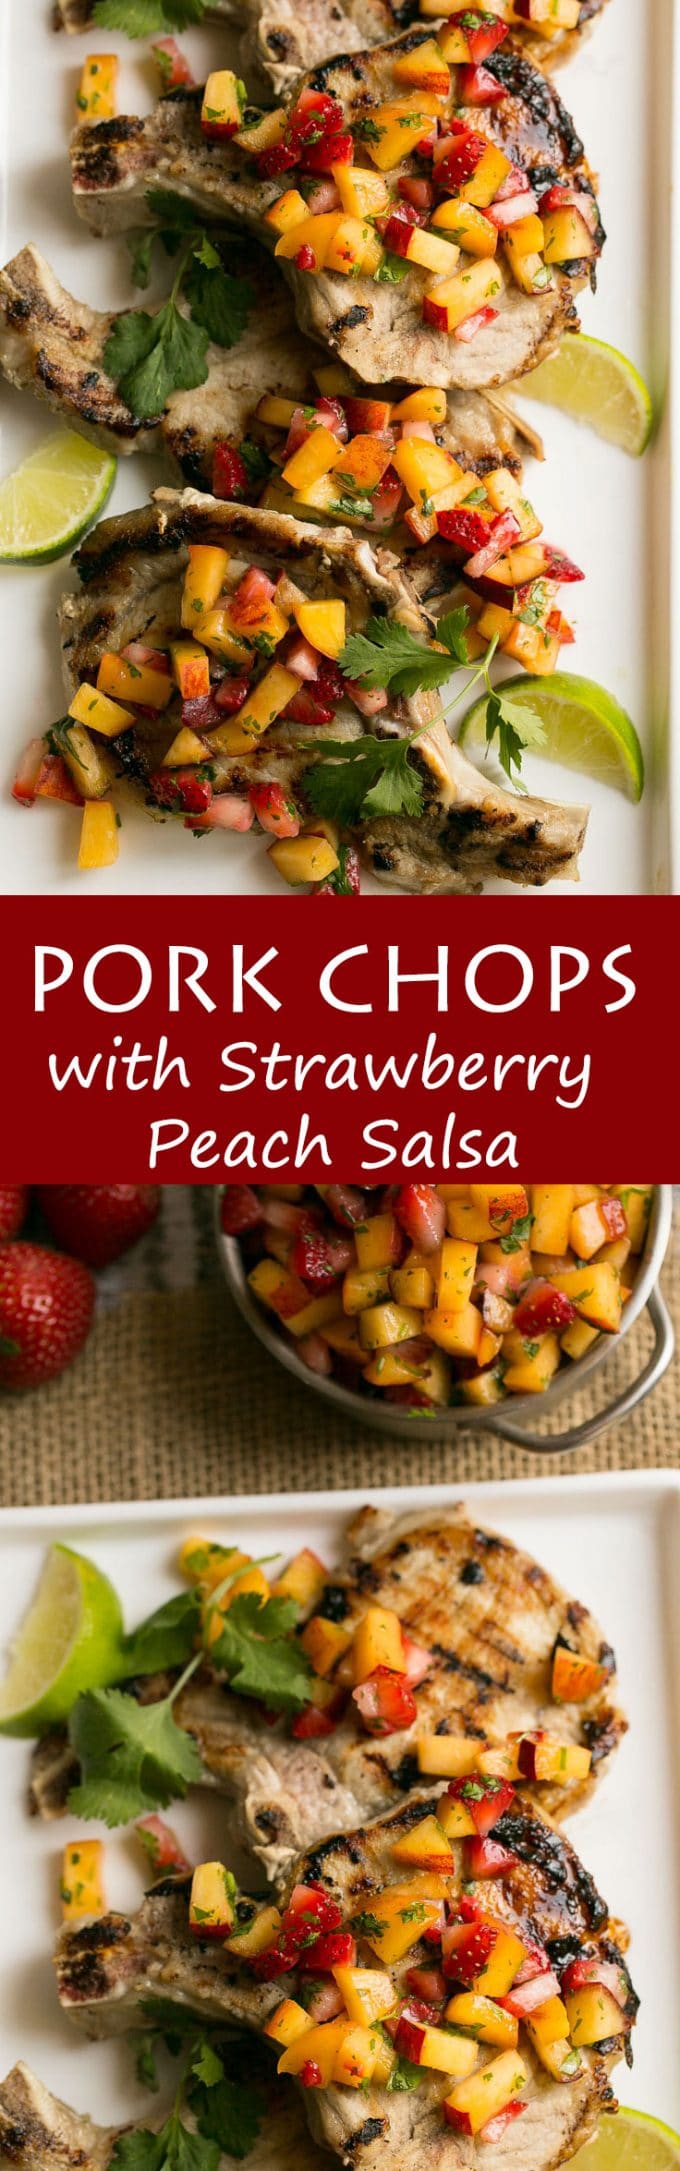 Grilled pork chops with strawberry peach salsa look fancy but are super easy to make.